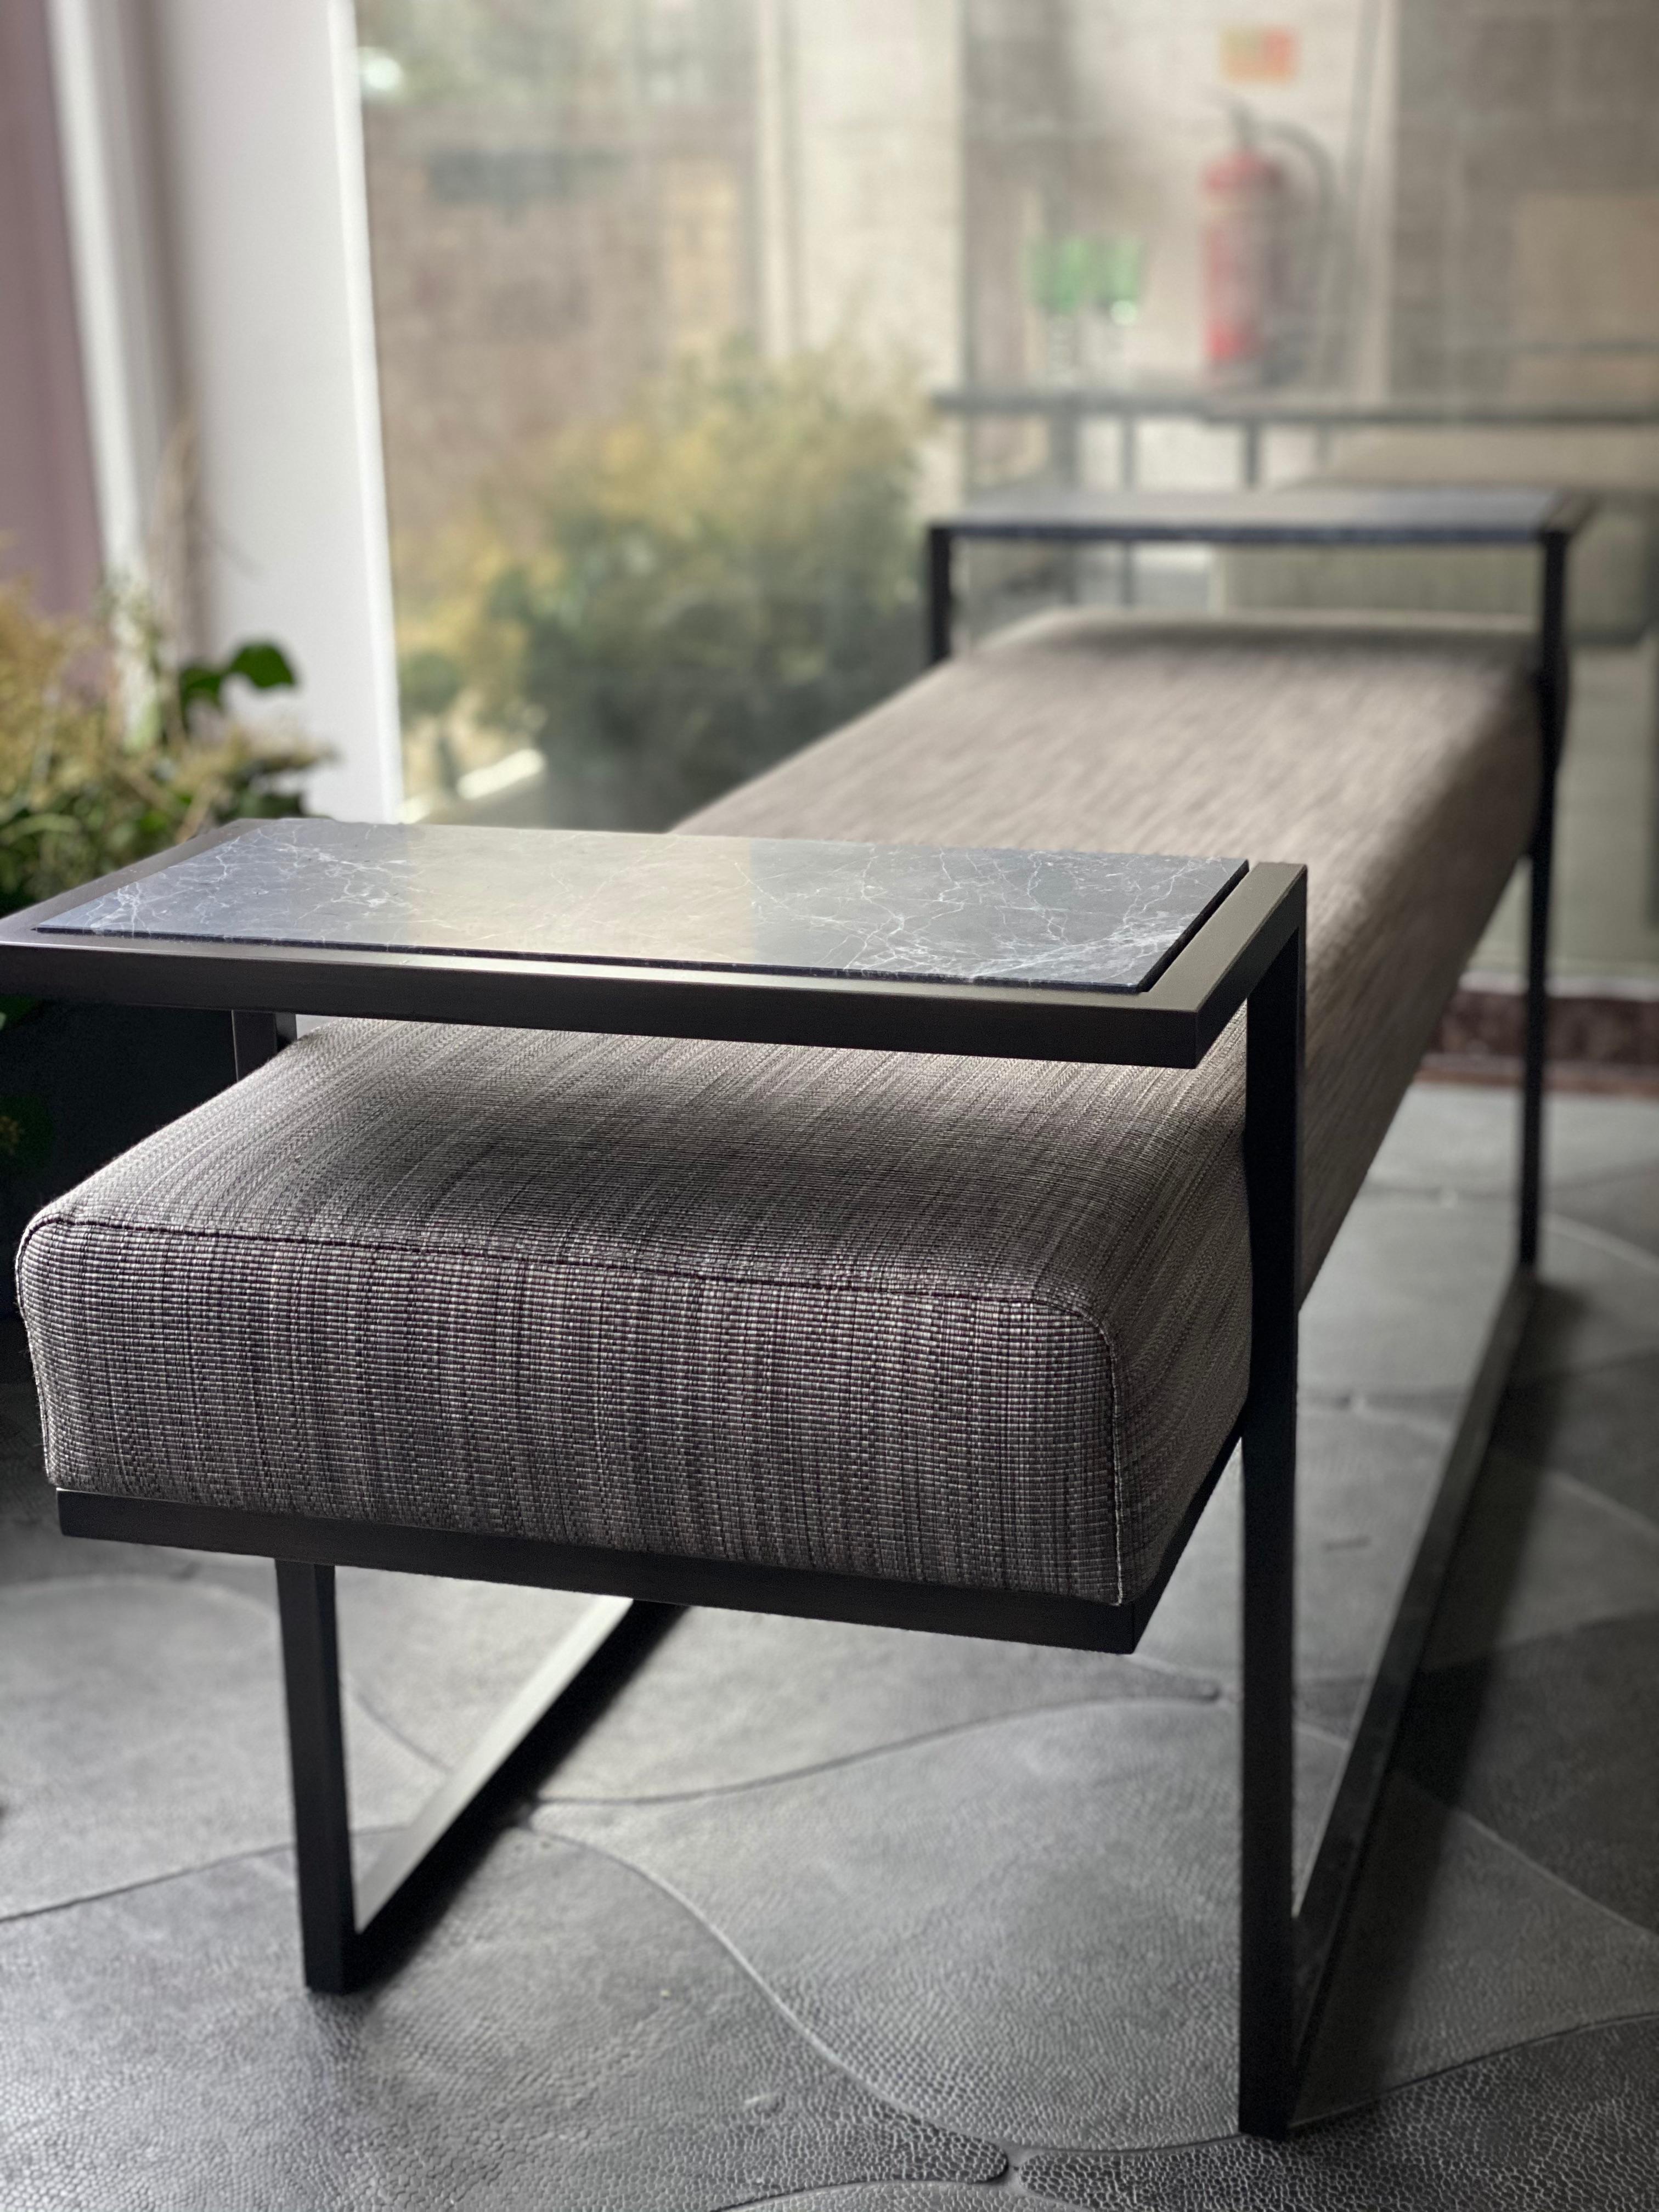 Named after the Greek god of sexual attraction, the Eros bench will visually seduce with its architectural lines and demanding presence. Made from blackened steel and upholstered in one of Casa Botelho’s luxe fabrics, the Eros bench is an ideal